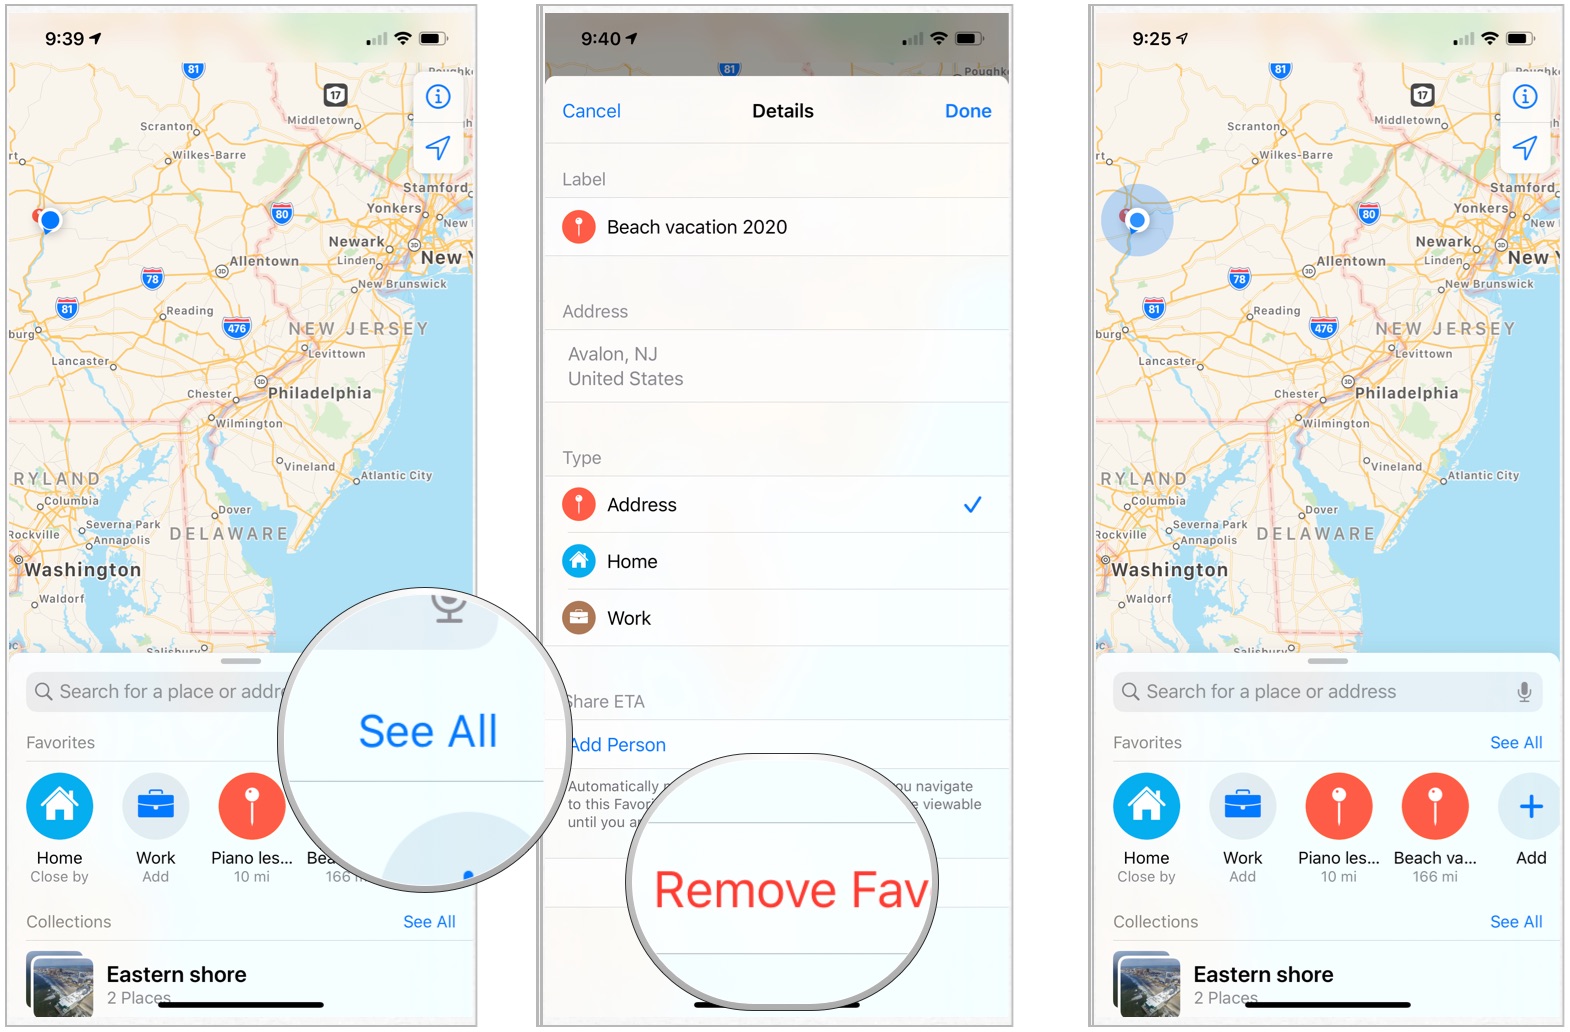 To delete favorites for the Maps app, tap See All next the favorites list, then choose the information icon next to the location you wish to delete. Then tap Remove Favorite.